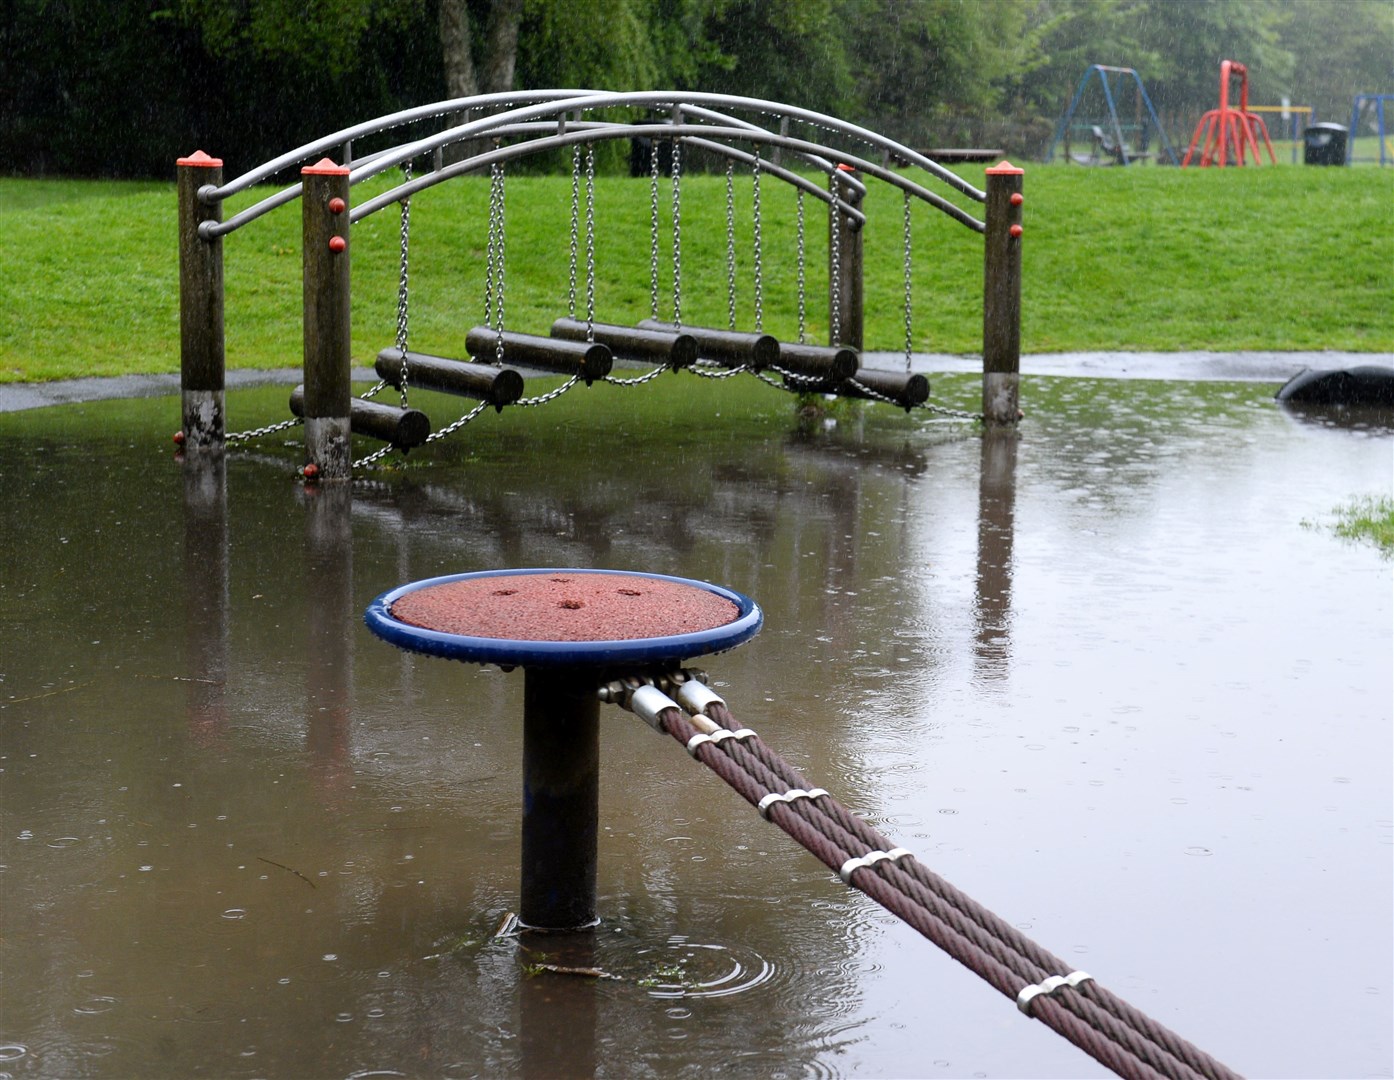 Rain puts fun on hold at Whin Park.